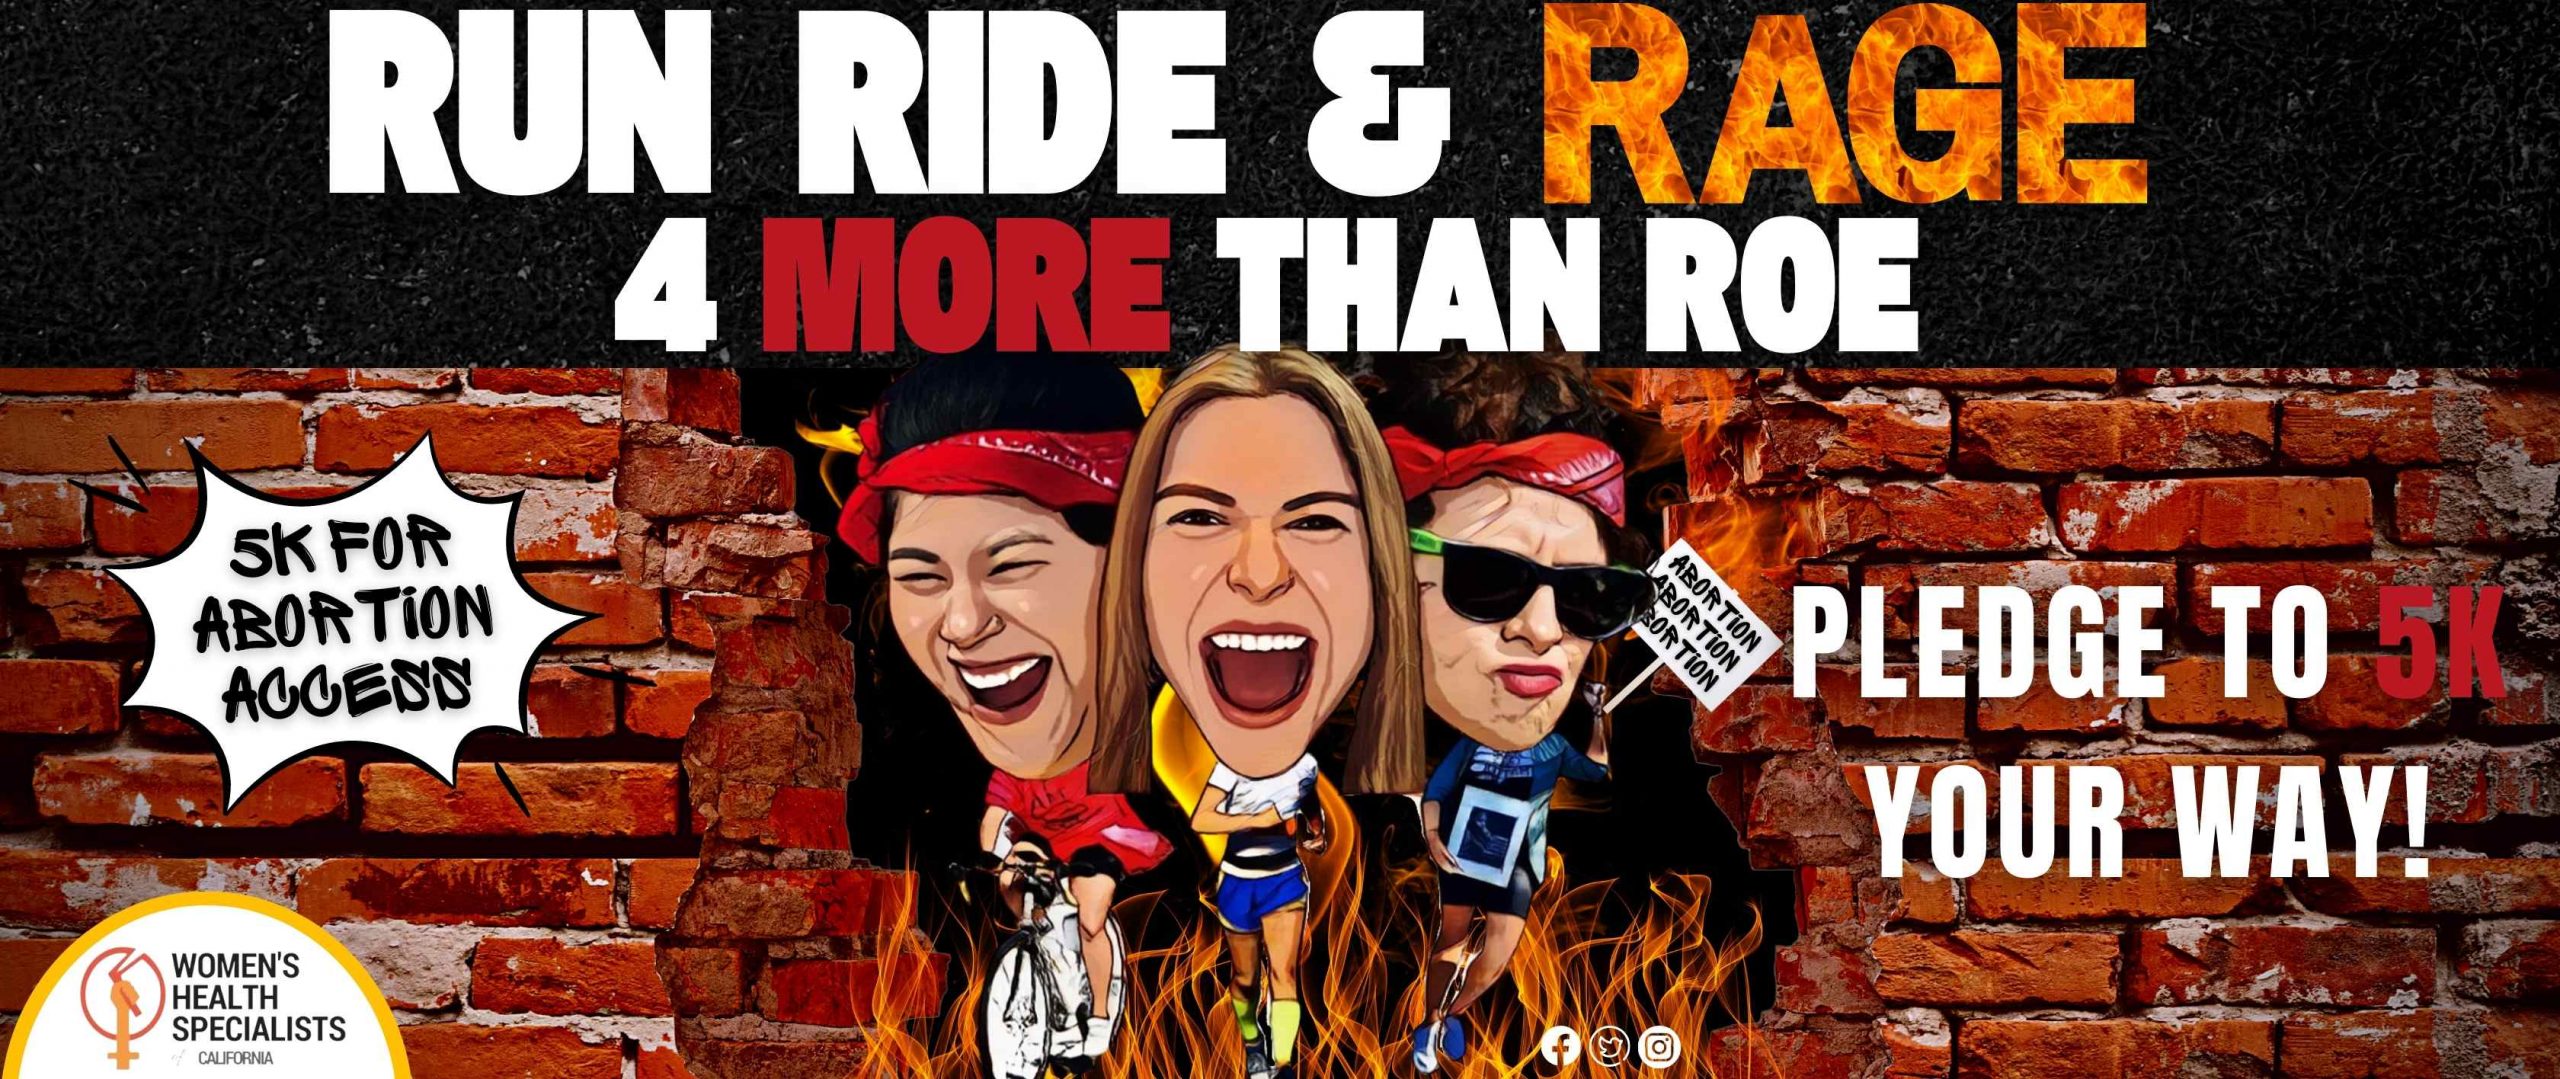 Run, Ride, & Rage for ROE!